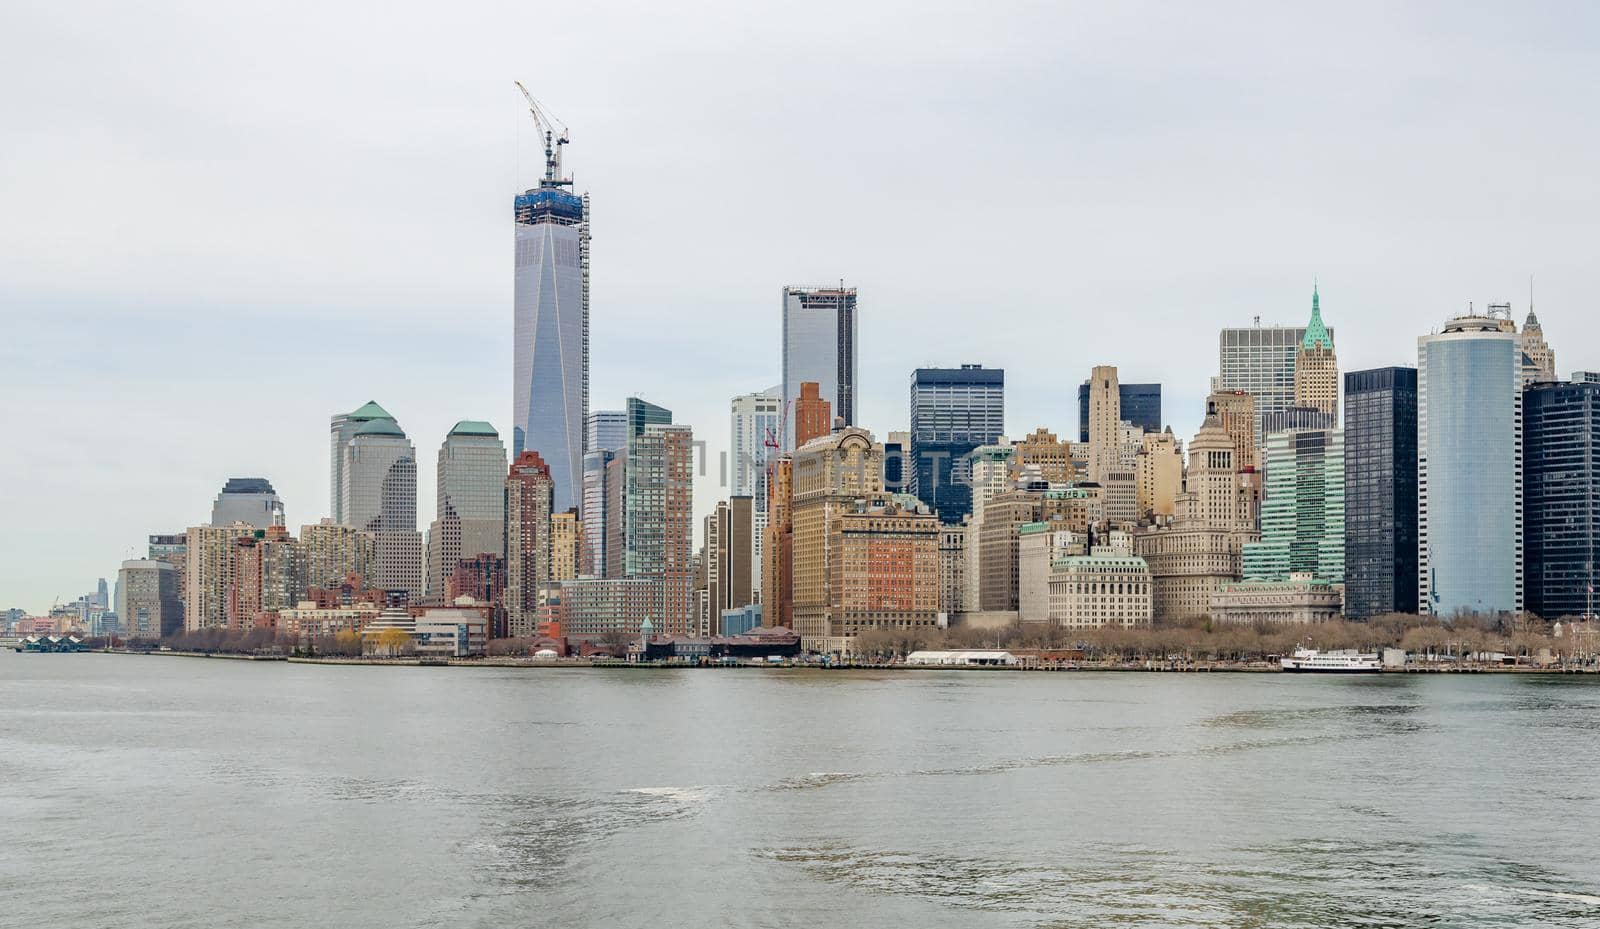 Manhattan Skyline with One World Trade Center construction site and Hudson river in forefront by bildgigant